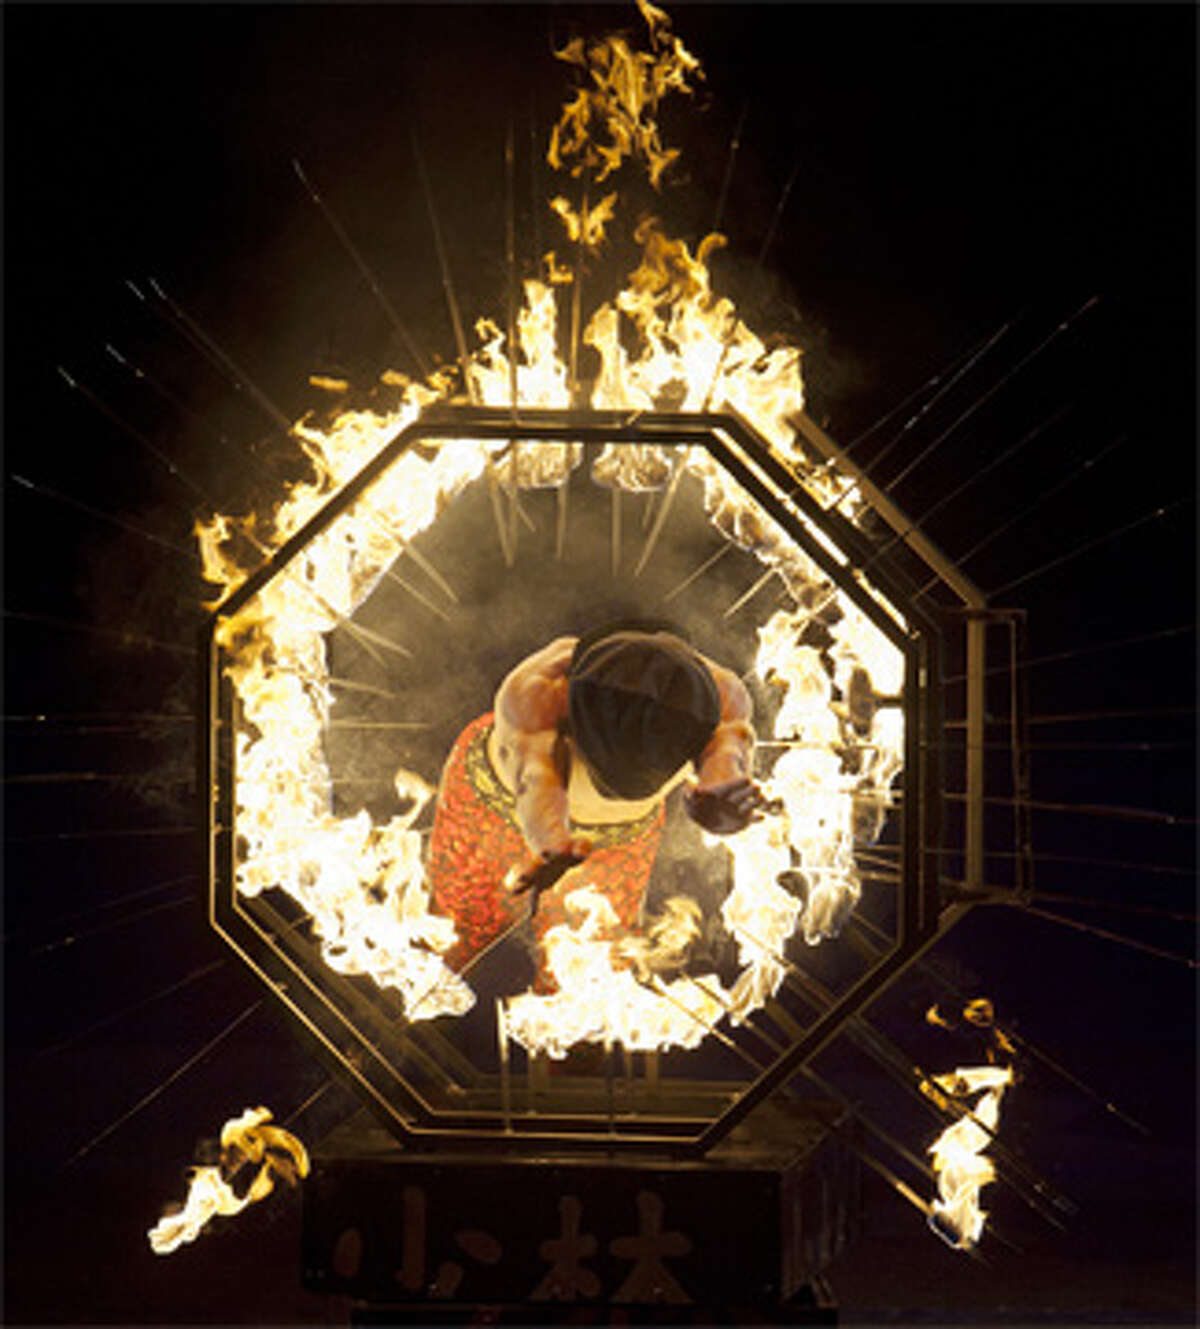 An aerial view of a Shaolin Warrior, or kung fu-style martial artist, jumping through knives on fire at a circus show.